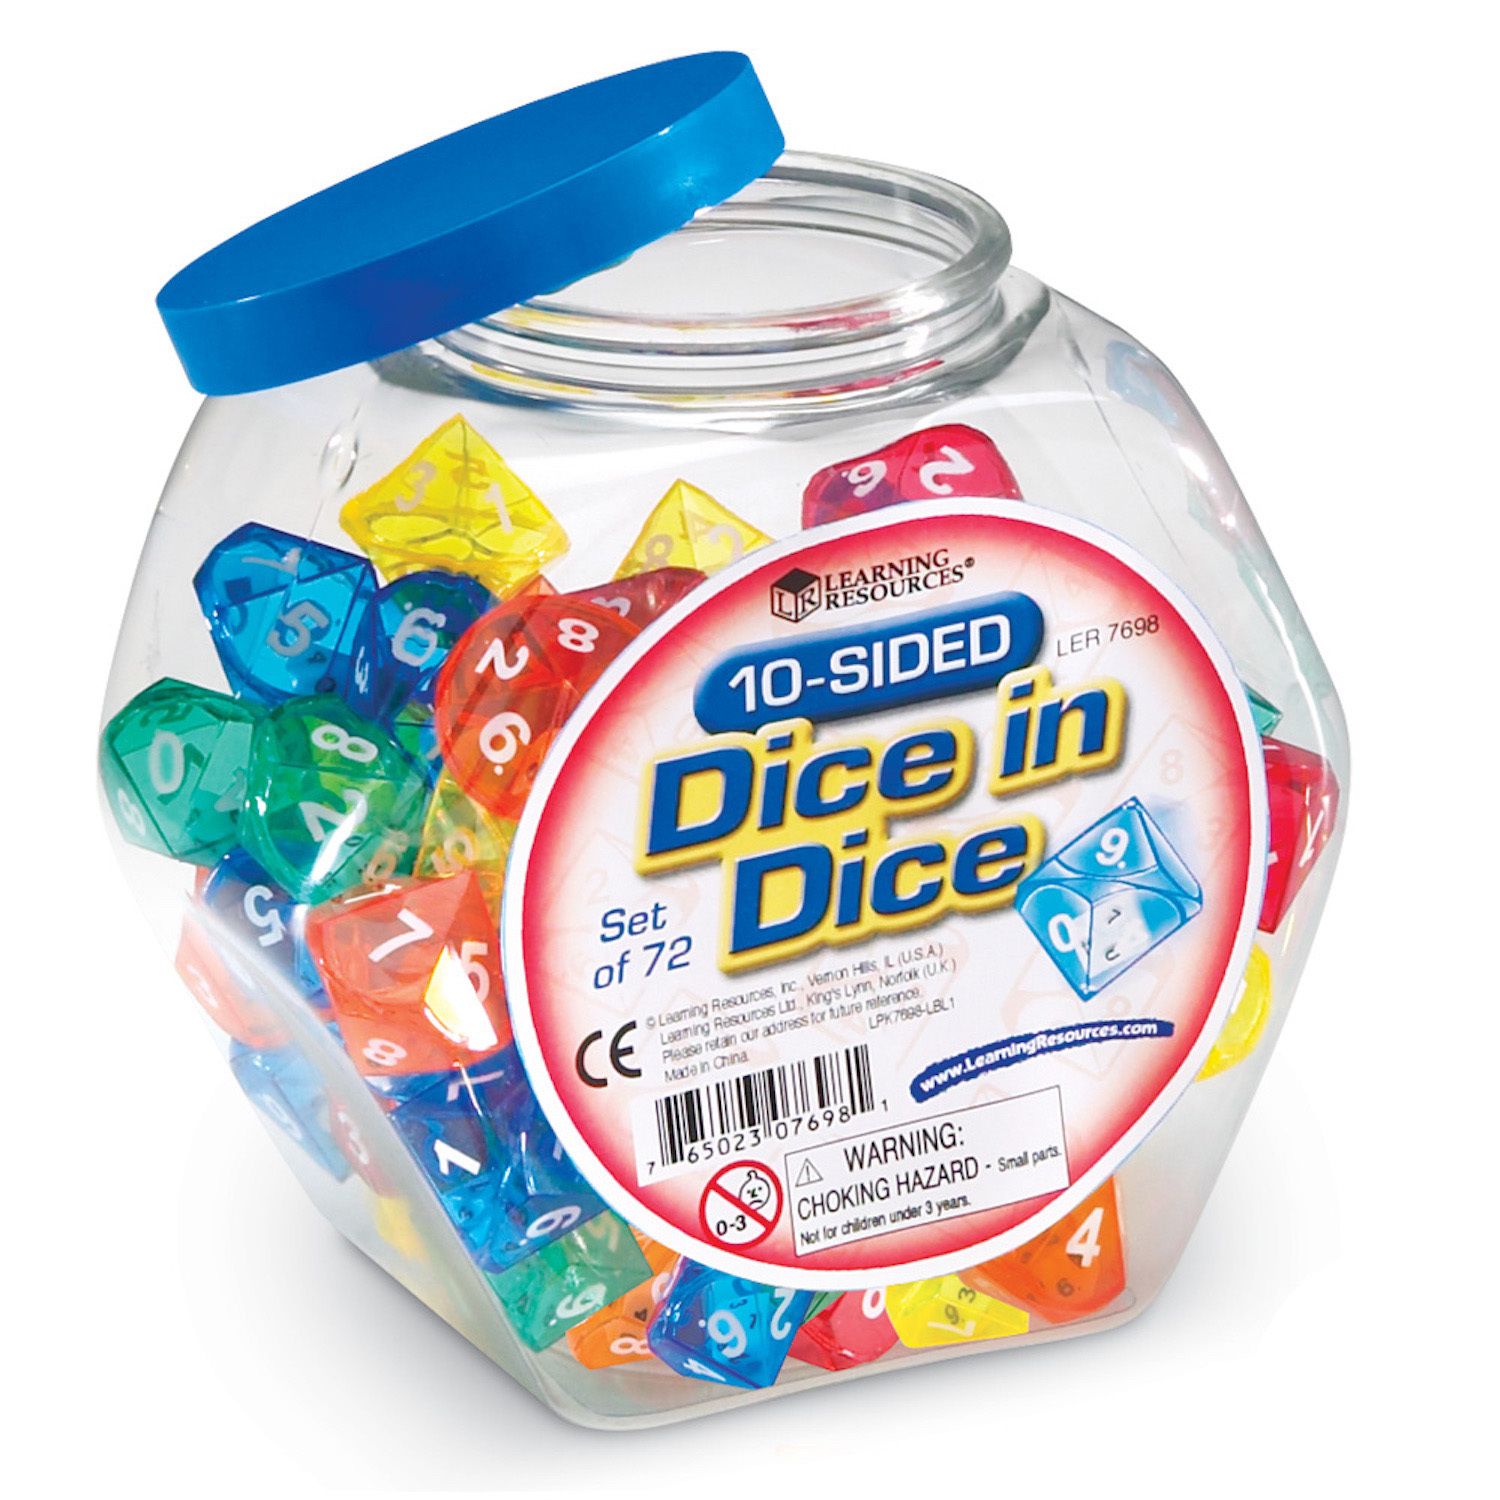 Image for Learning Resources 10-Sided Dice in Dice Set at Kohl's.